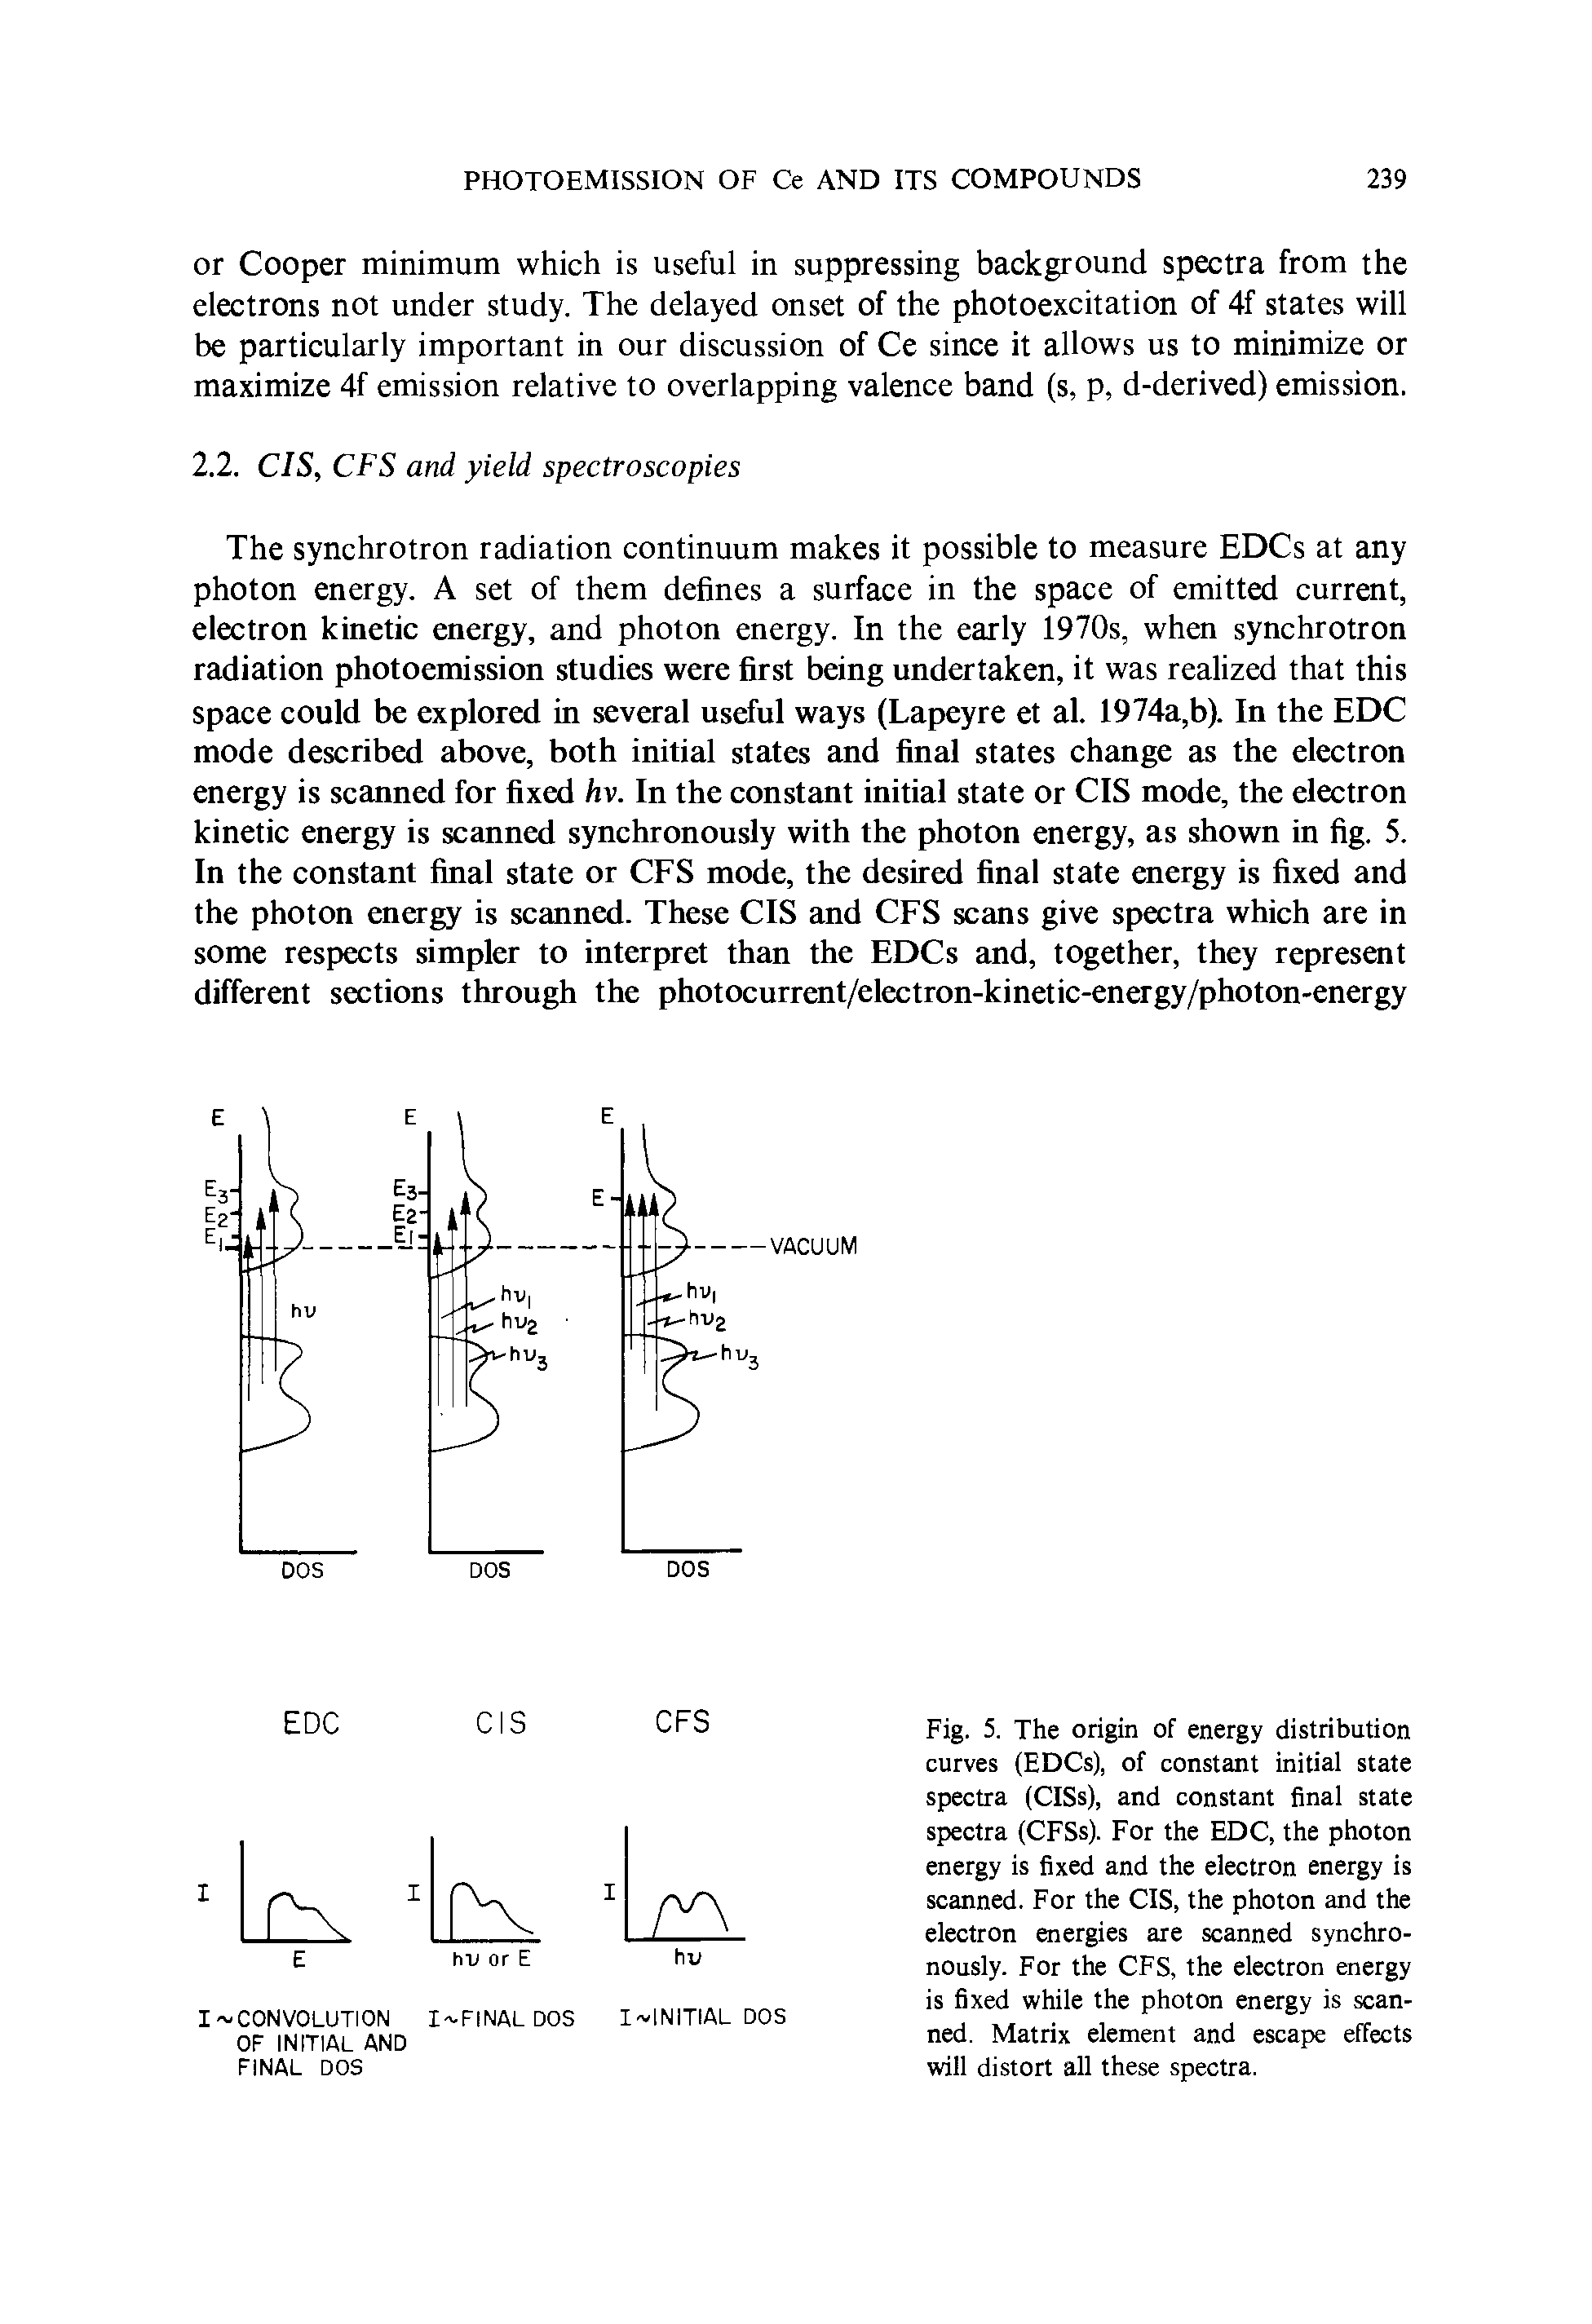 Fig. 5. The origin of energy distribution curves (EDCs), of constant initial state spectra (CISs), and constant final state spectra (CFSs). For the EDC, the photon energy is fixed and the electron energy is scanned. For the CIS, the photon and the electron energies are scanned synchronously. For the CFS, the electron energy is fixed while the photon energy is scanned. Matrix element and escape effects will distort all these spectra.